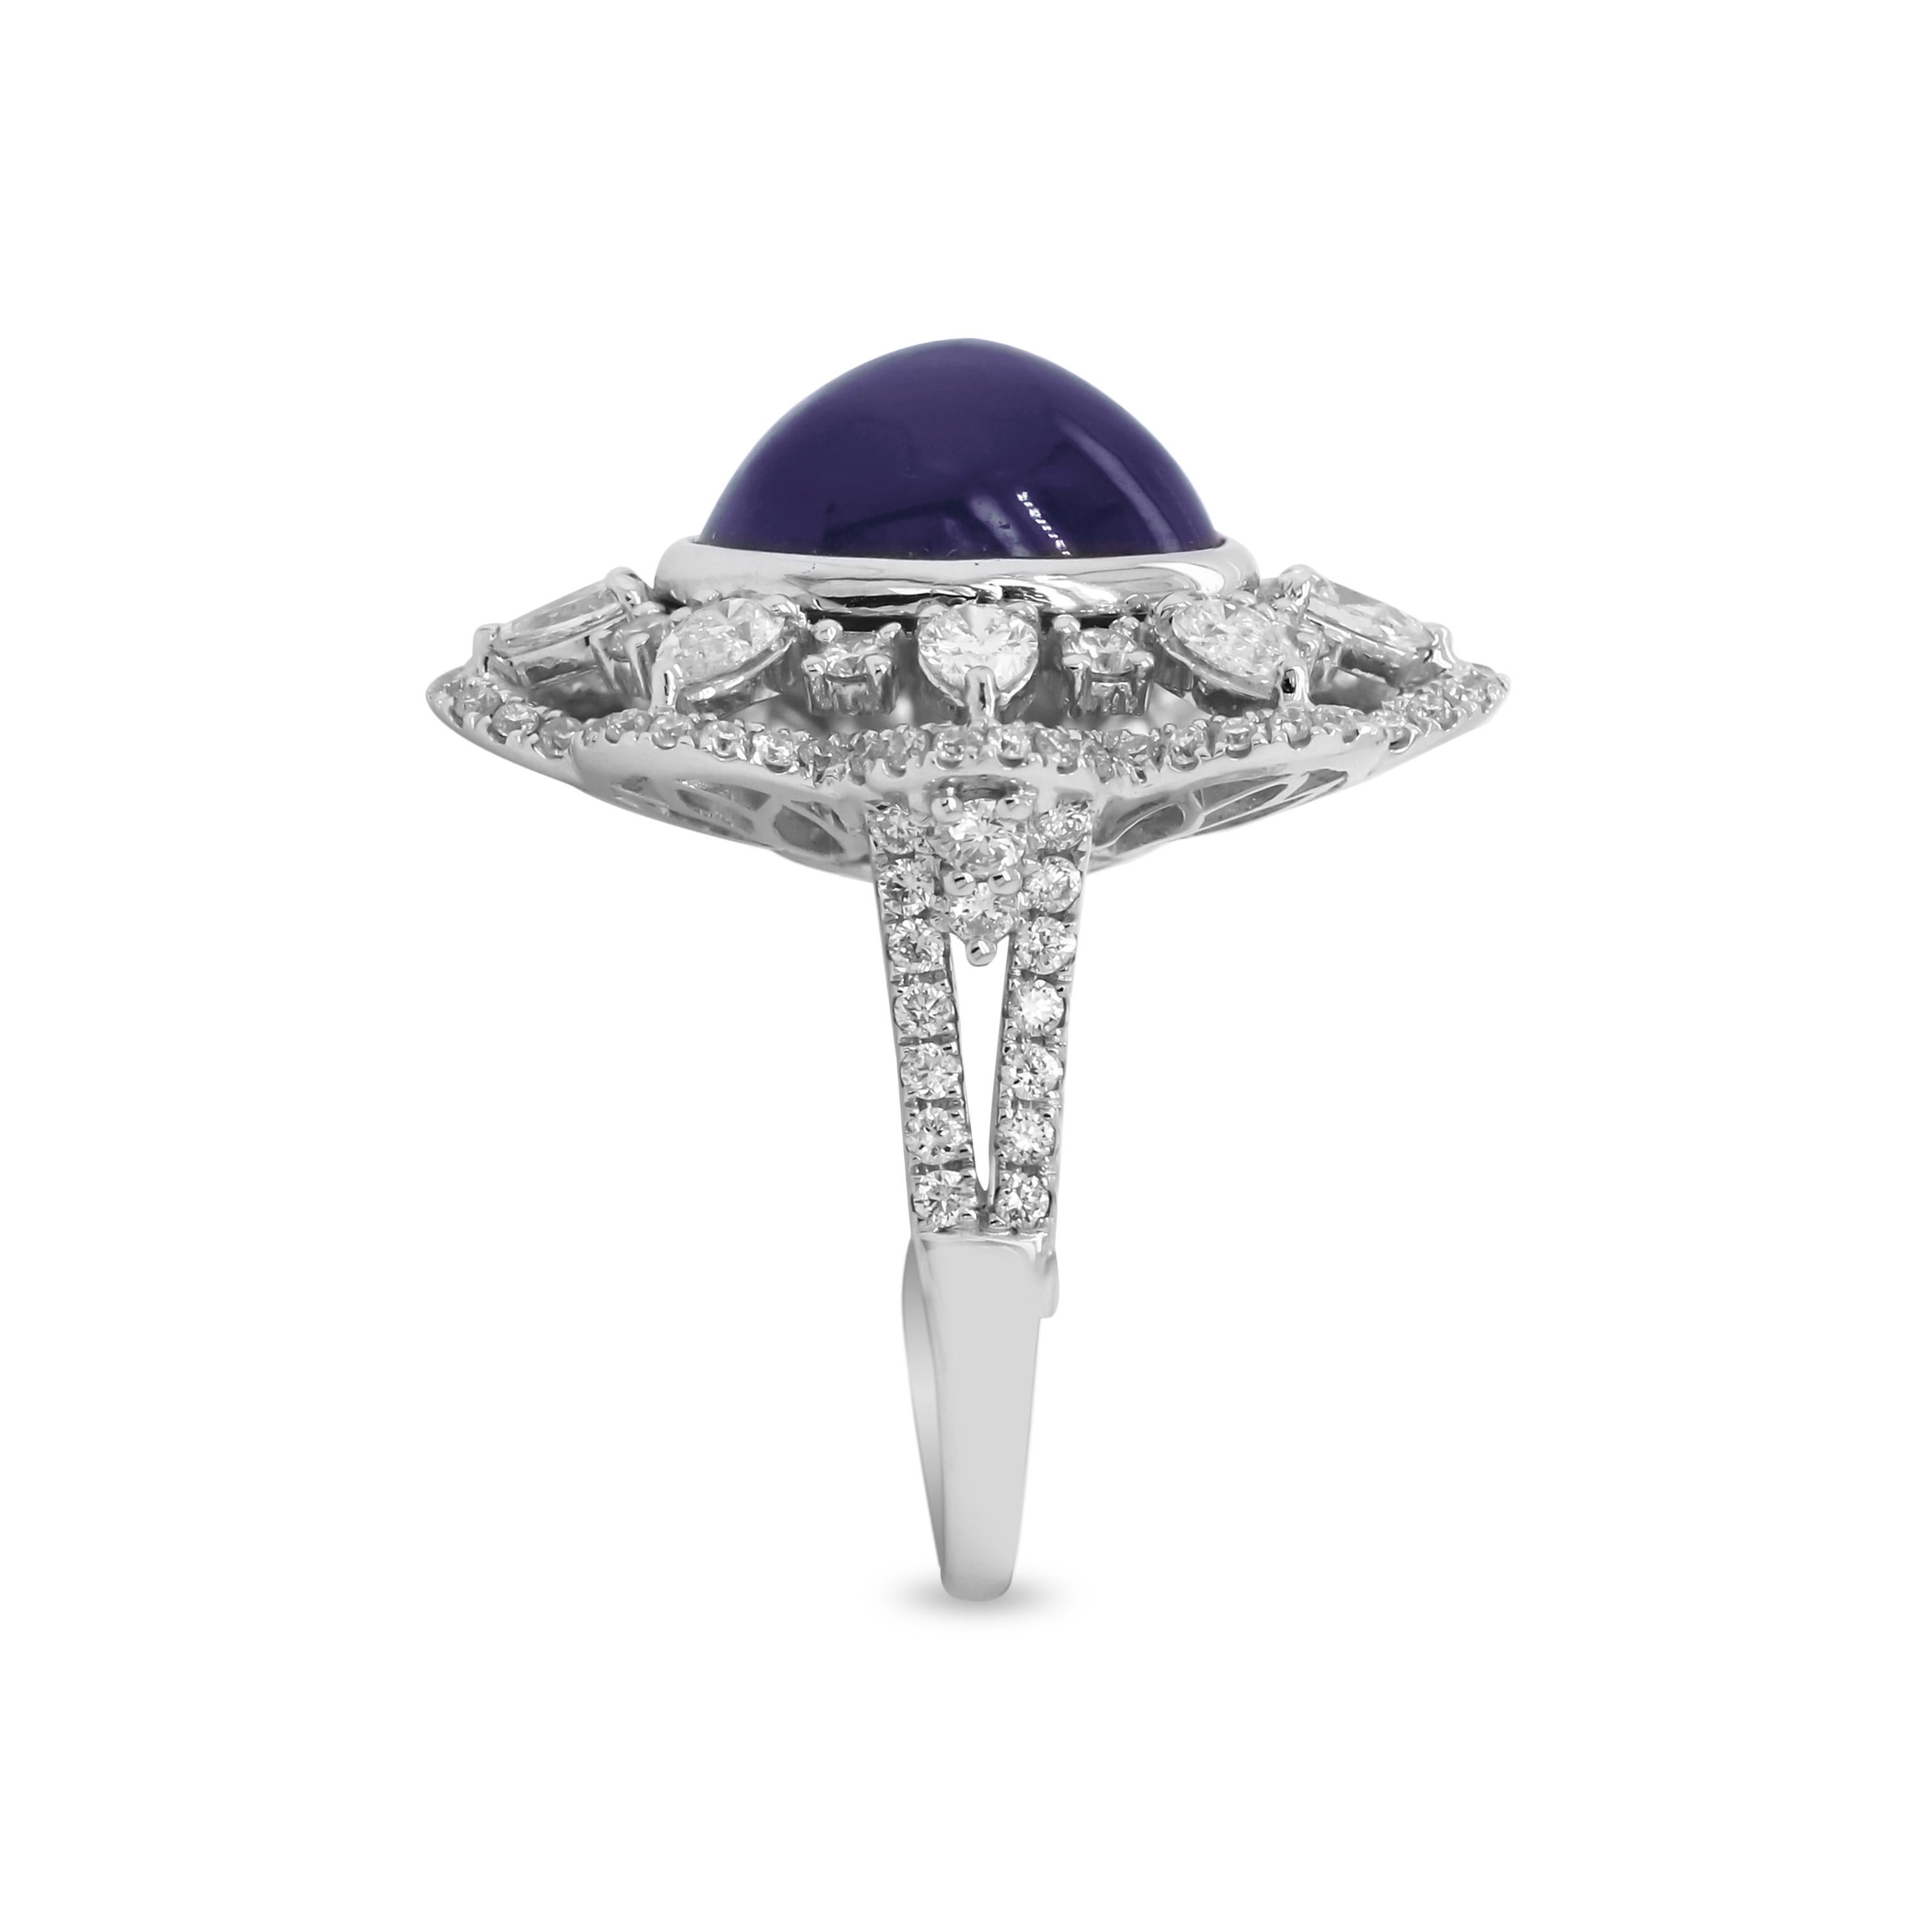 18k White Gold Pear Shape and Round Diamond Ring with Cabochon Blue Sapphire Center

This beautiful ring with an Oval, Cabochon Blue Sapphire Center & White Diamonds is truly a work of art.

9.77 carat Cabochon Blue Sapphire. 
0.87 carat G color, VS